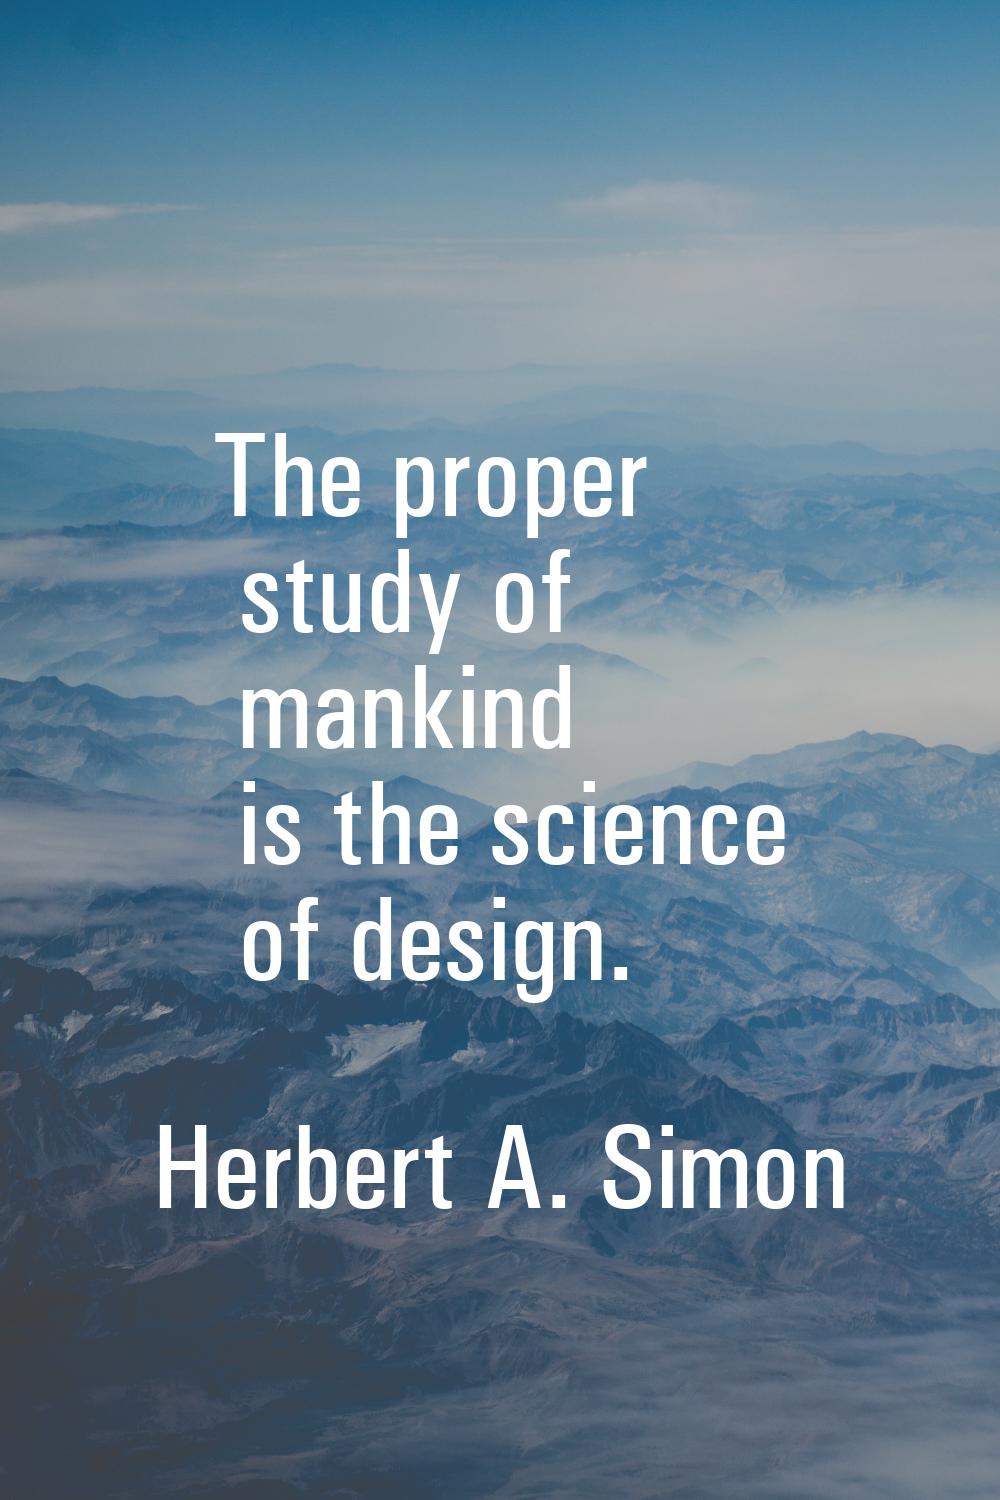 The proper study of mankind is the science of design.